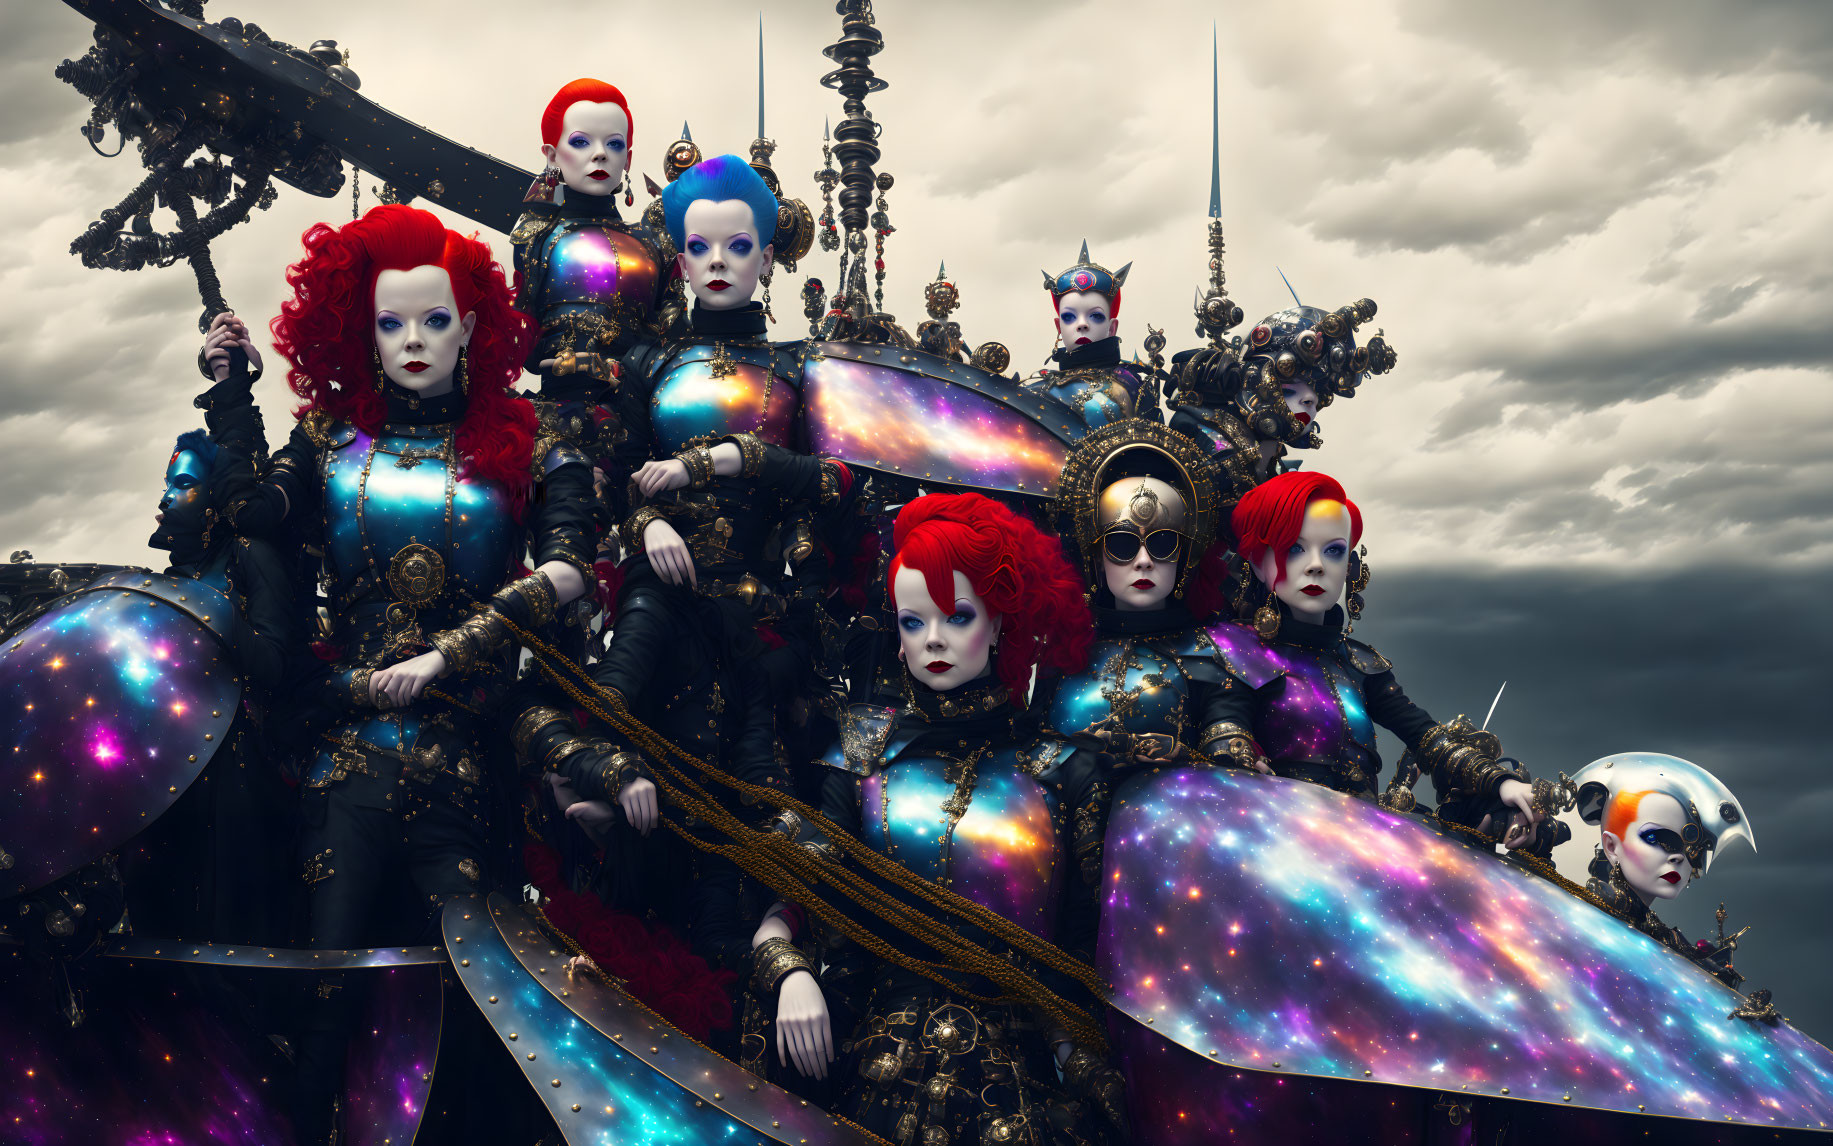 Individuals in elaborate cosmic-themed costumes against cloudy sky